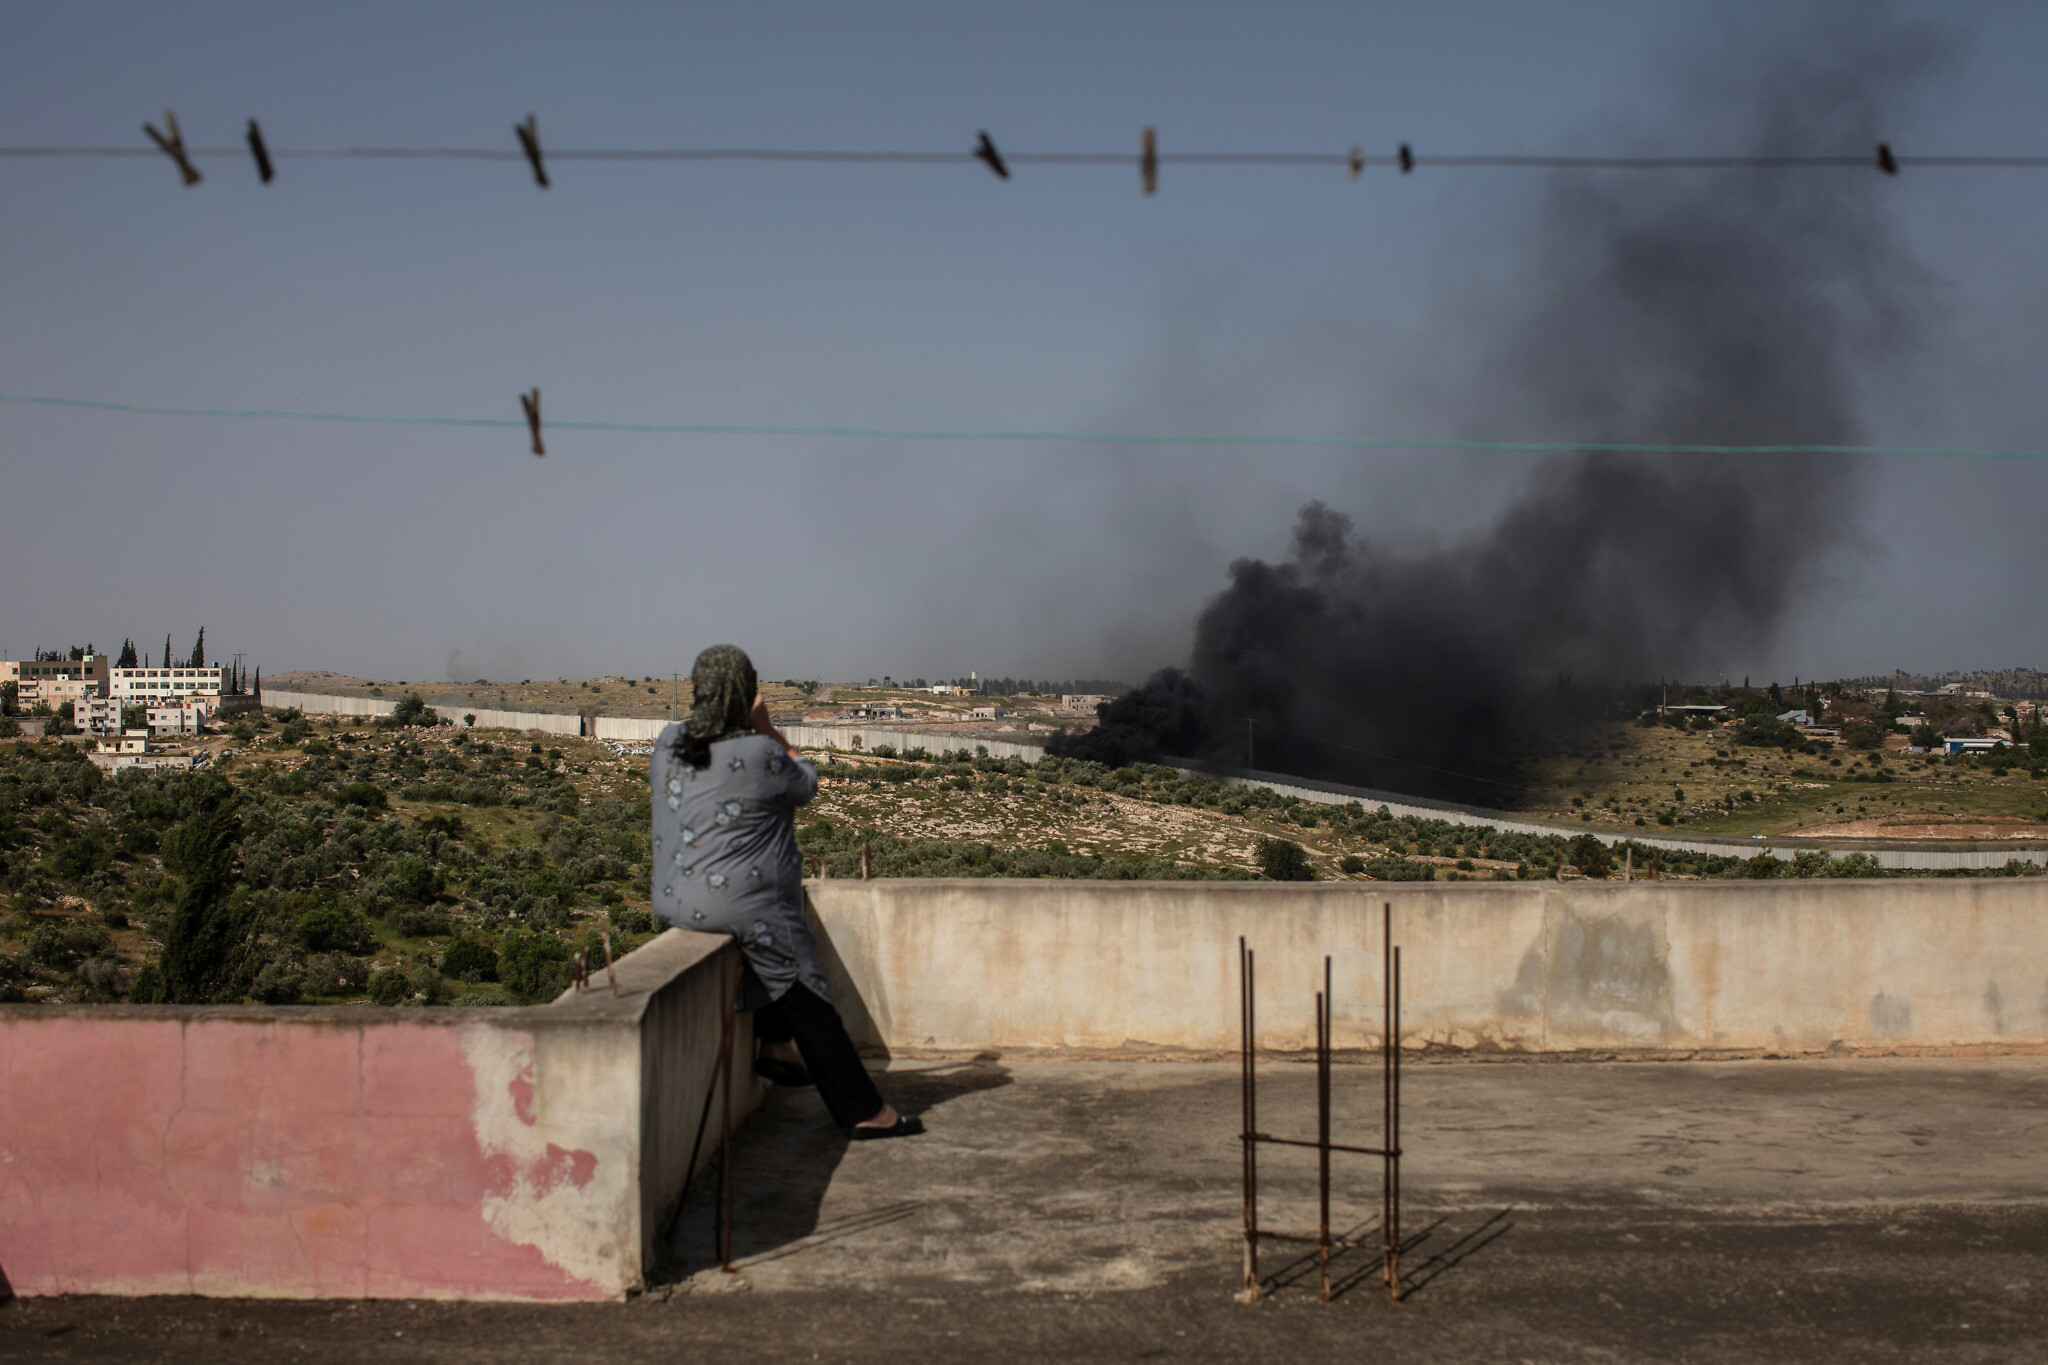 Maysoon Sweity, a 54-year-old Palestinian from Beit Awwa, sits on the roof of her home and watches as e-waste and garbage burns near the concrete wall separating her village from Israel on April 26, 2019. (Tamir Kalifa)